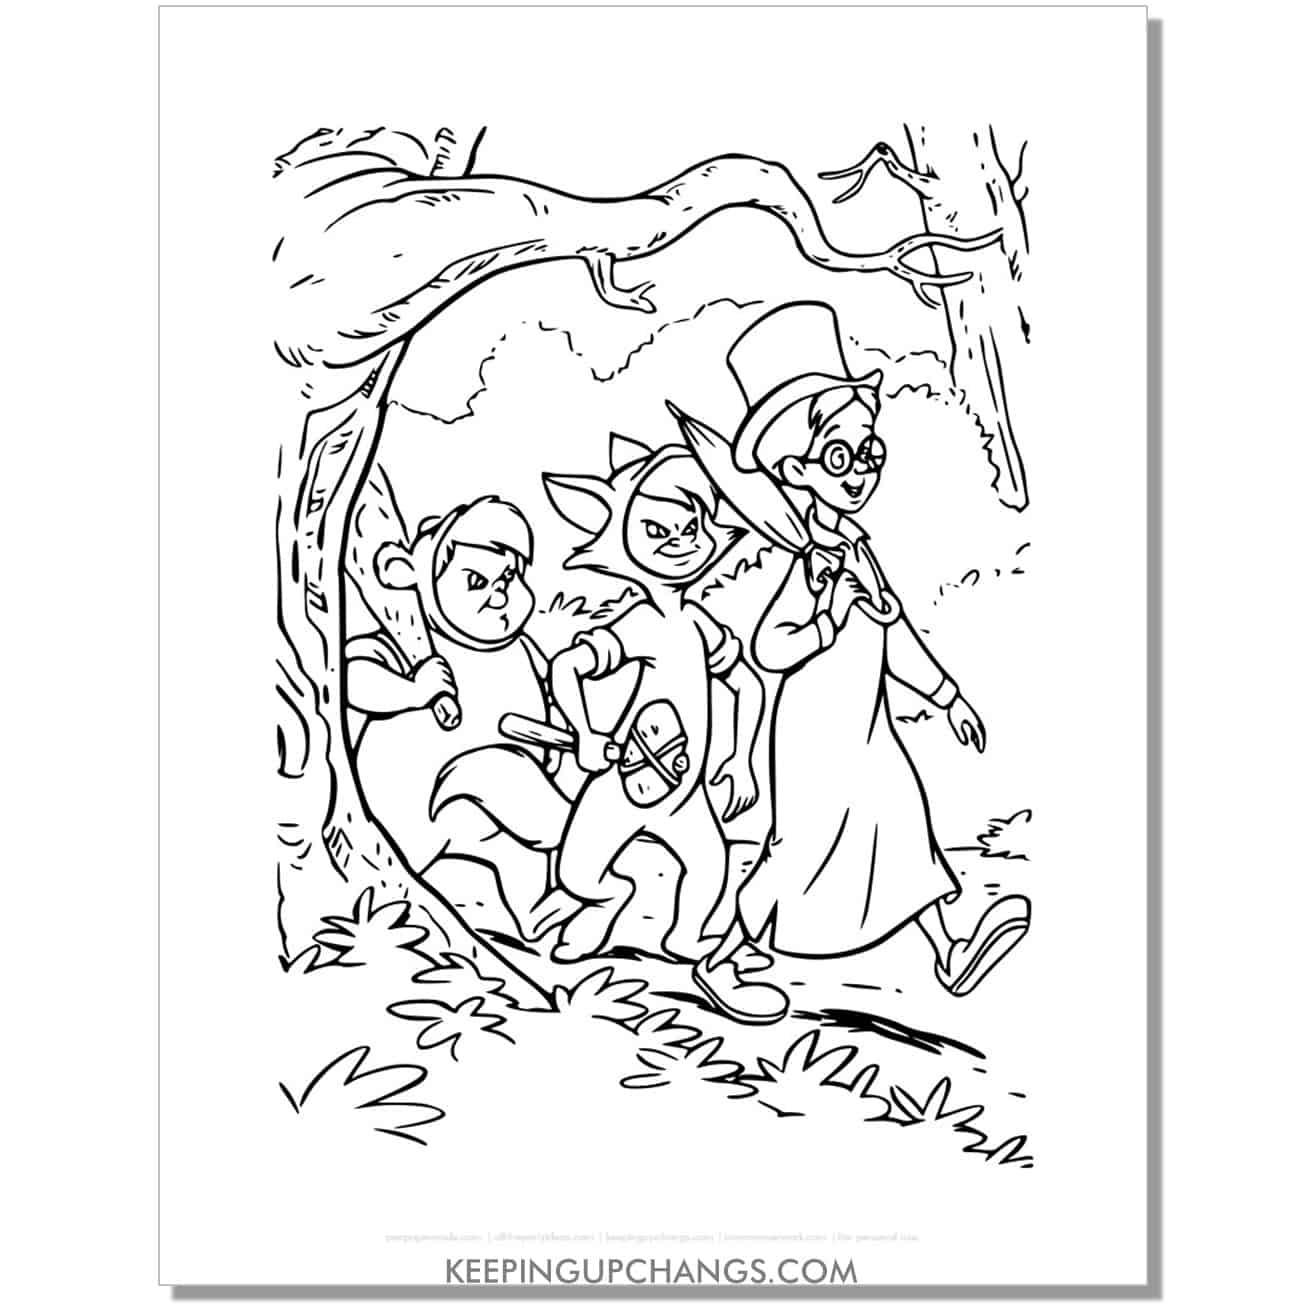 john darling and the lost boys of peter pan coloring page, sheet.